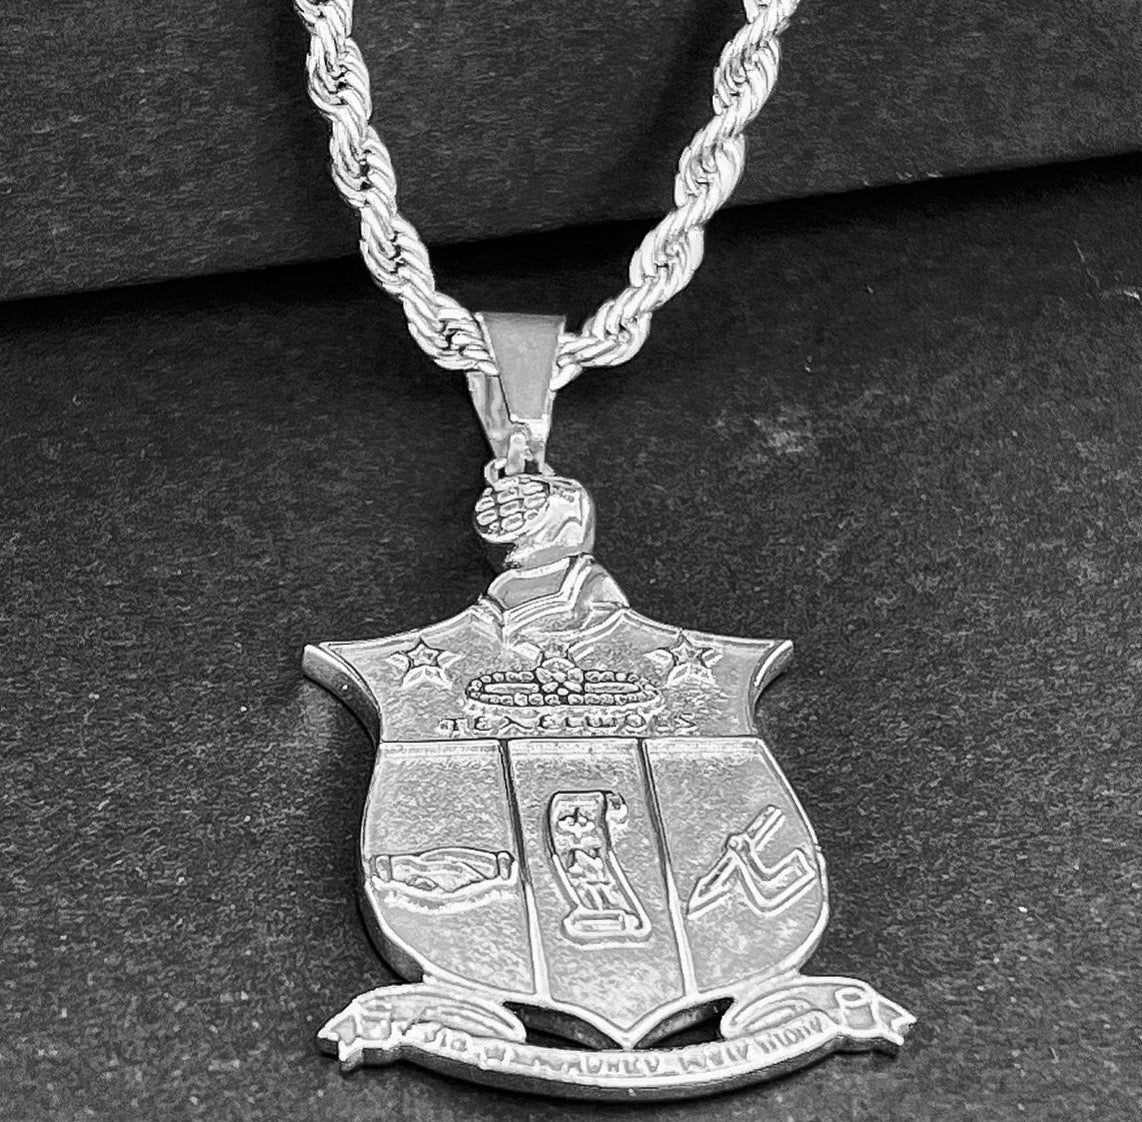 A beyond stunning Kappa Alpha Psi necklace and charm made with Stainless Steel Silver. This pendant is made to last for generations and generations, perfect for that special Kappa Alpha Psi member. The ultimate gift to show off your fraternity pride is here!  • Official Kappa Alpha Psi Licensed Product: passed through examination and requirements by the Fraternity as a whole.